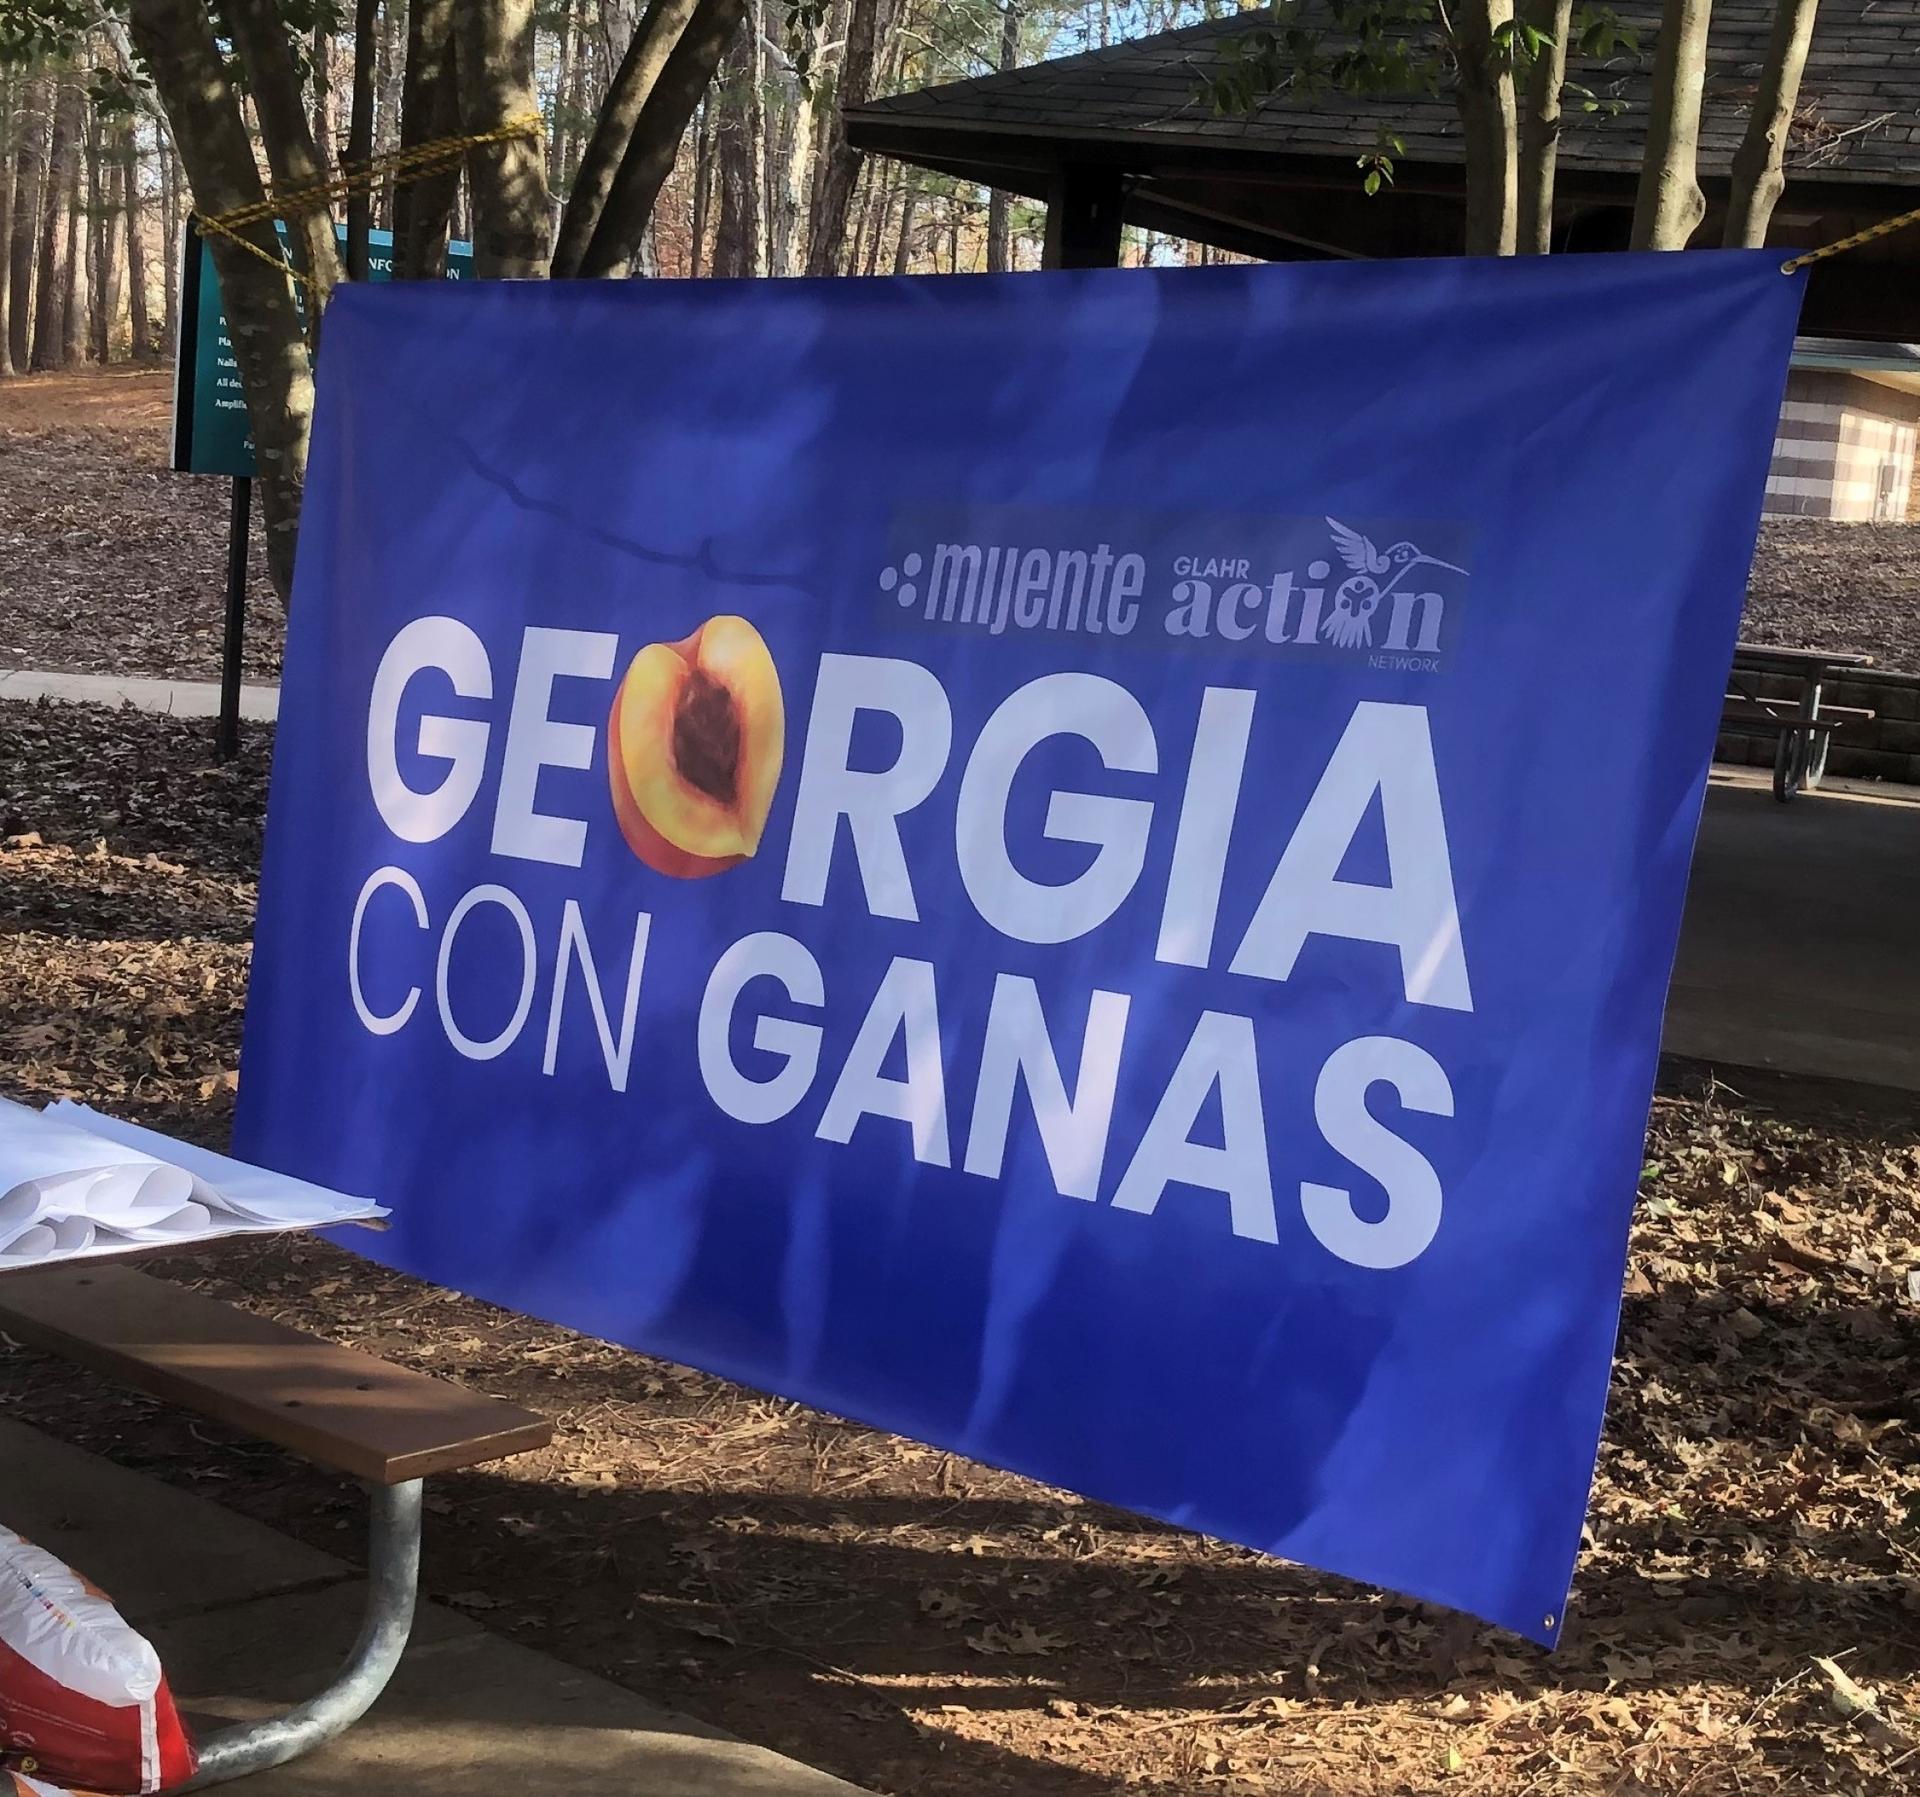 A blue sign with white letters says "Georgia con ganas."